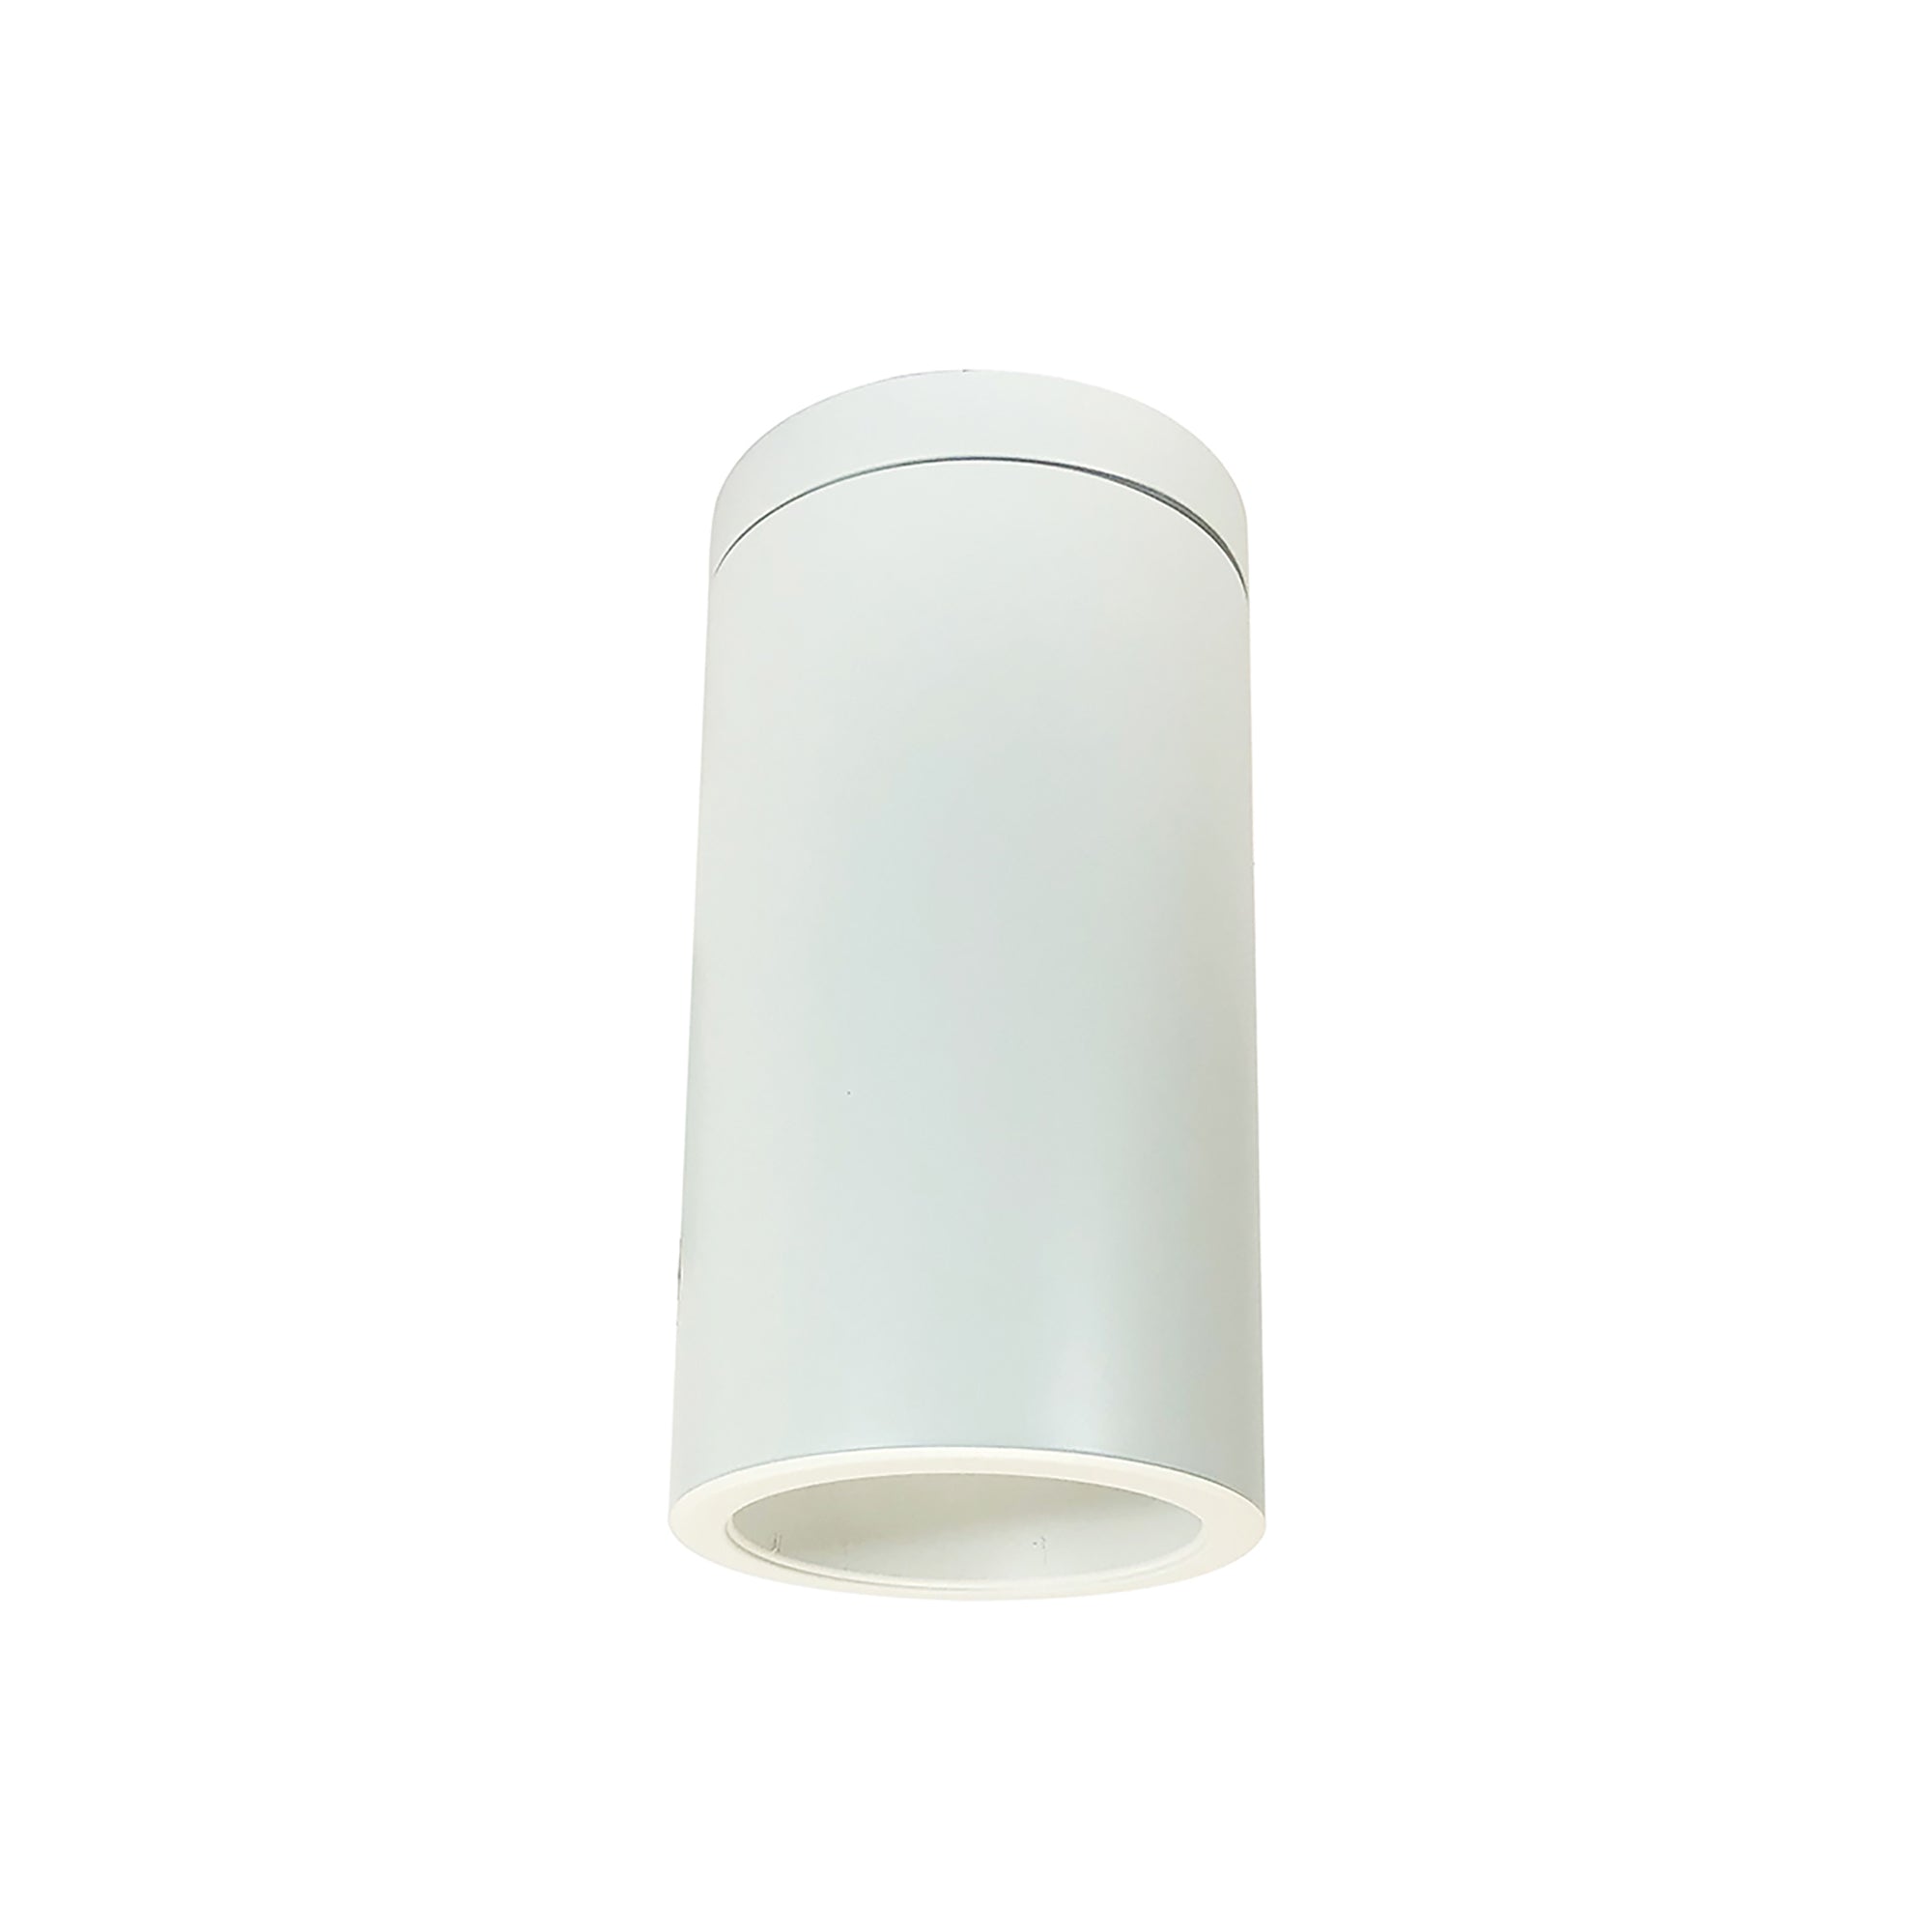 Nora Lighting NYLS2-6S15140FWWW6 - Cylinder - 6 Inch CYL SURFACE 1500LM REF FLD 40K WHT/WHT WHT CYL 120-277 0-10V